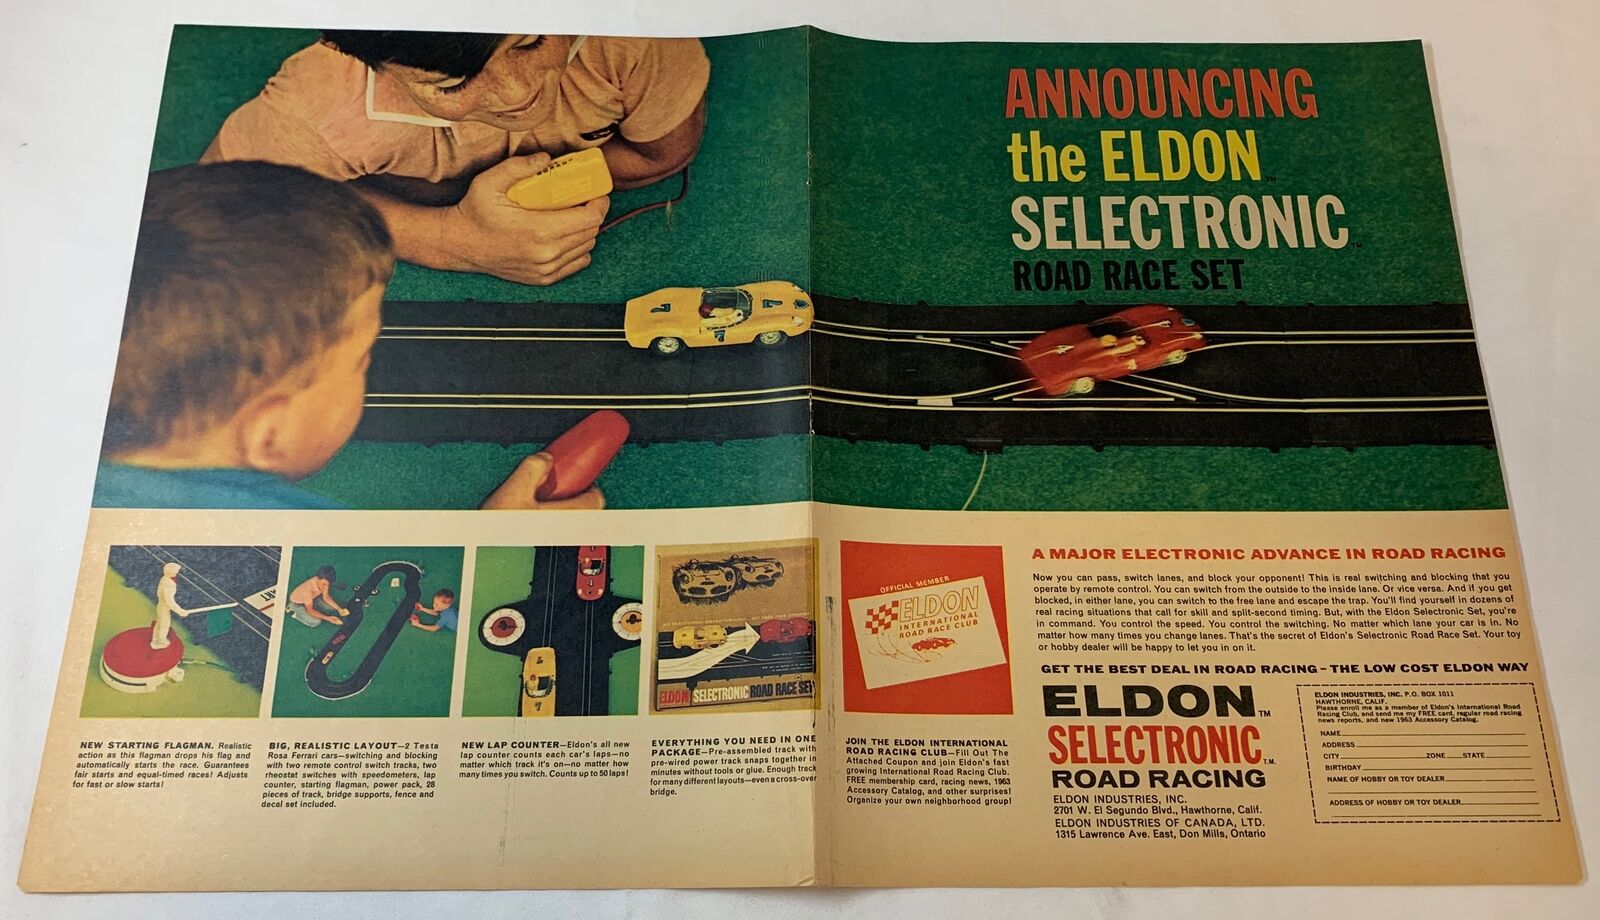 1963 ELDON Road Racing slot cars two page ad ~ ANNOUNCING SELECTRONIC